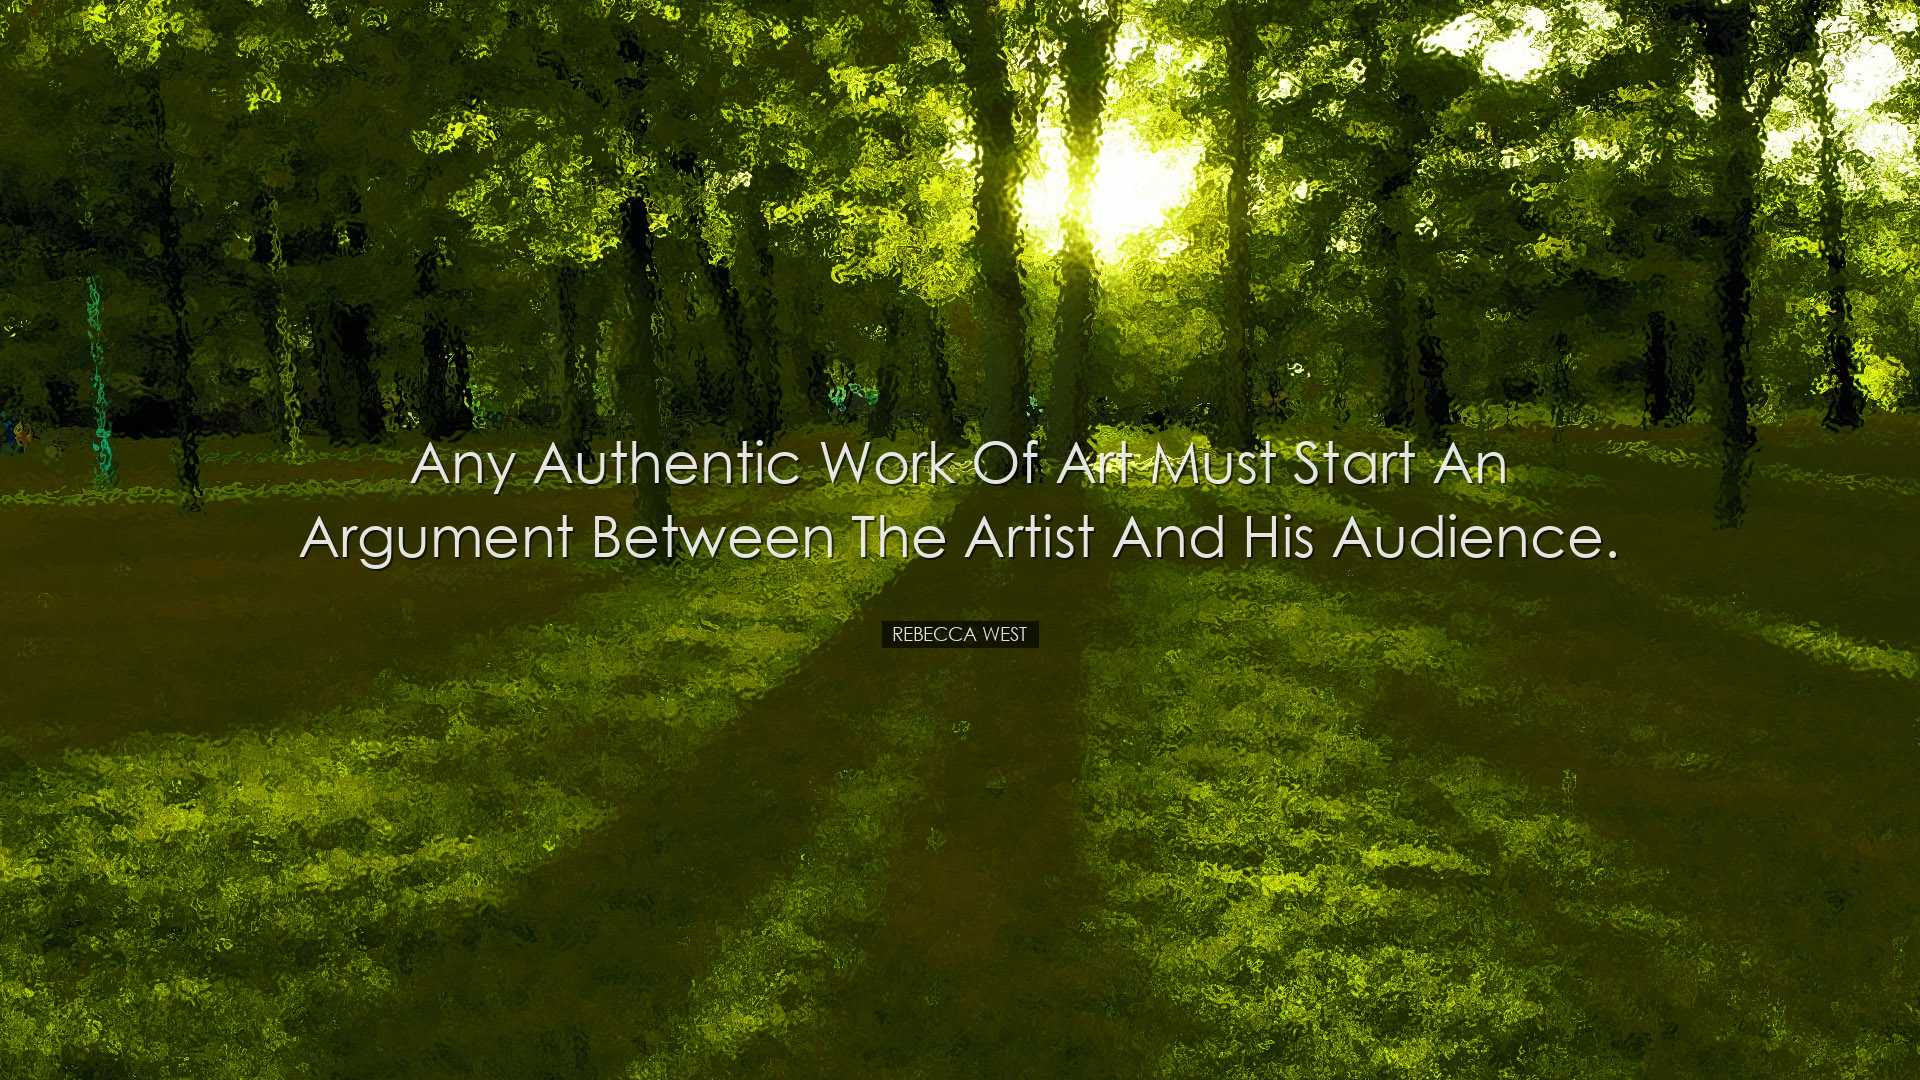 Any authentic work of art must start an argument between the artis